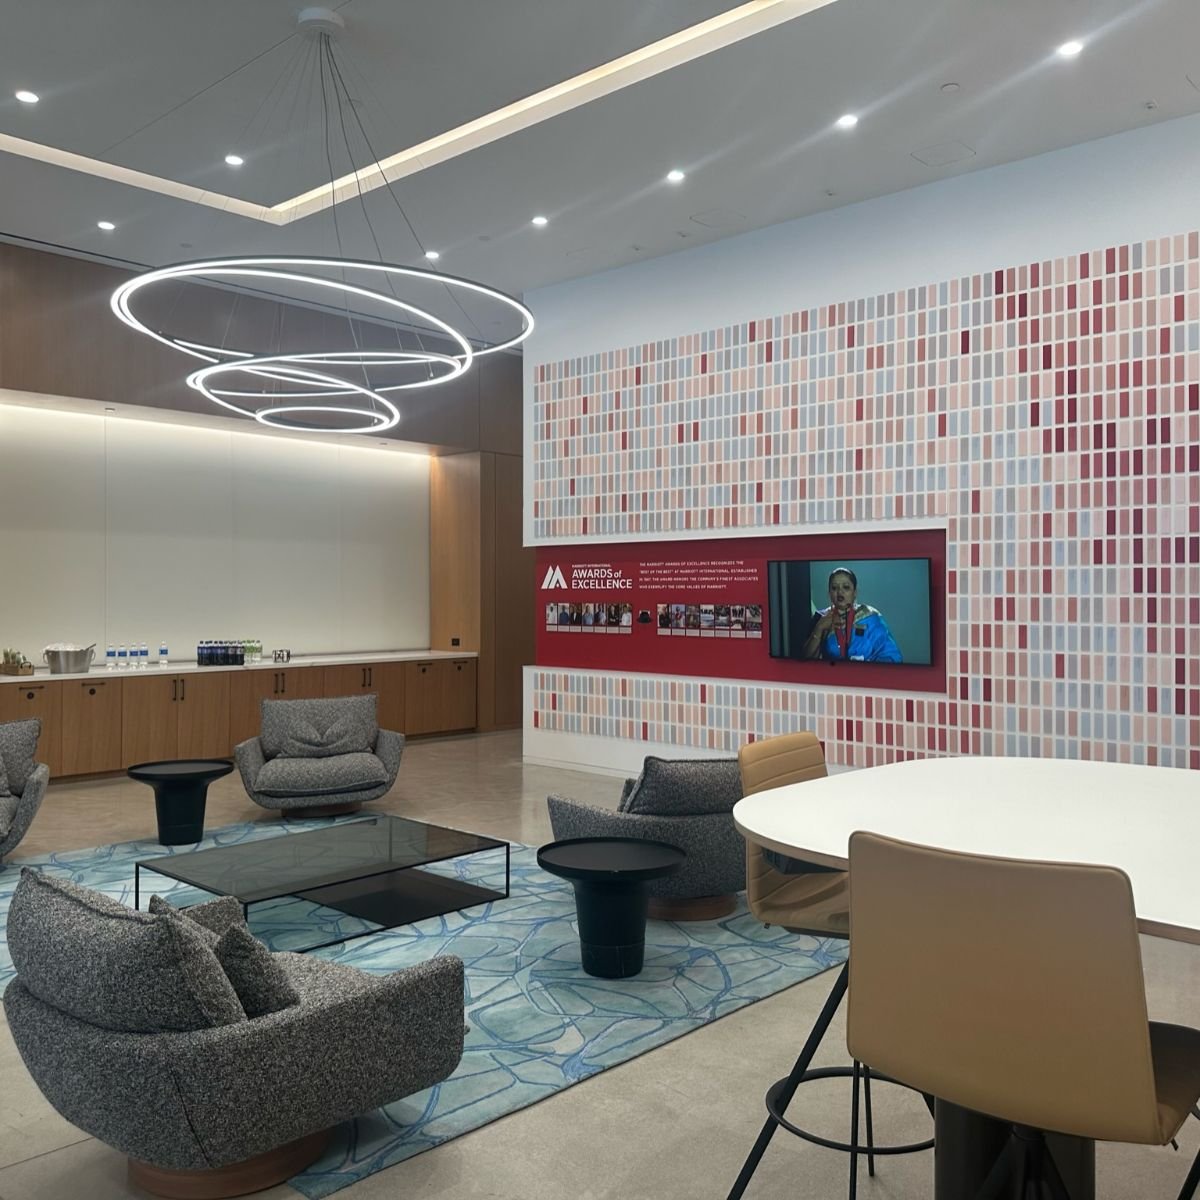  Marriott's global headquarters tour with TOBE Design Group 